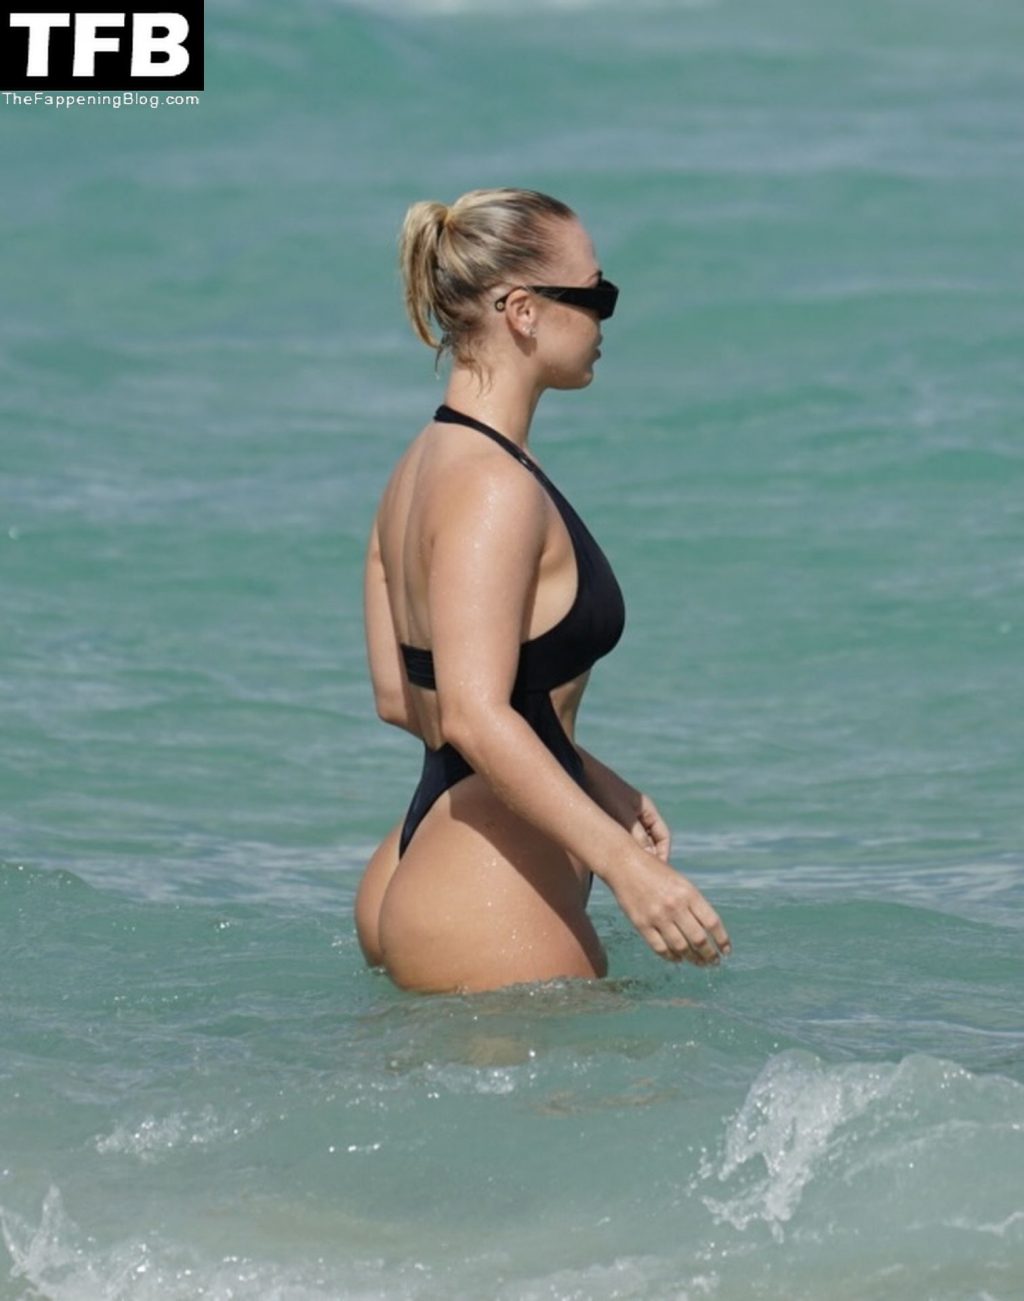 Bianca Elouise Sexy The Fappening Blog 3 1024x1301 - Bianca Elouise and Her Girls Show Off Their Curves in Miami (44 Photos)